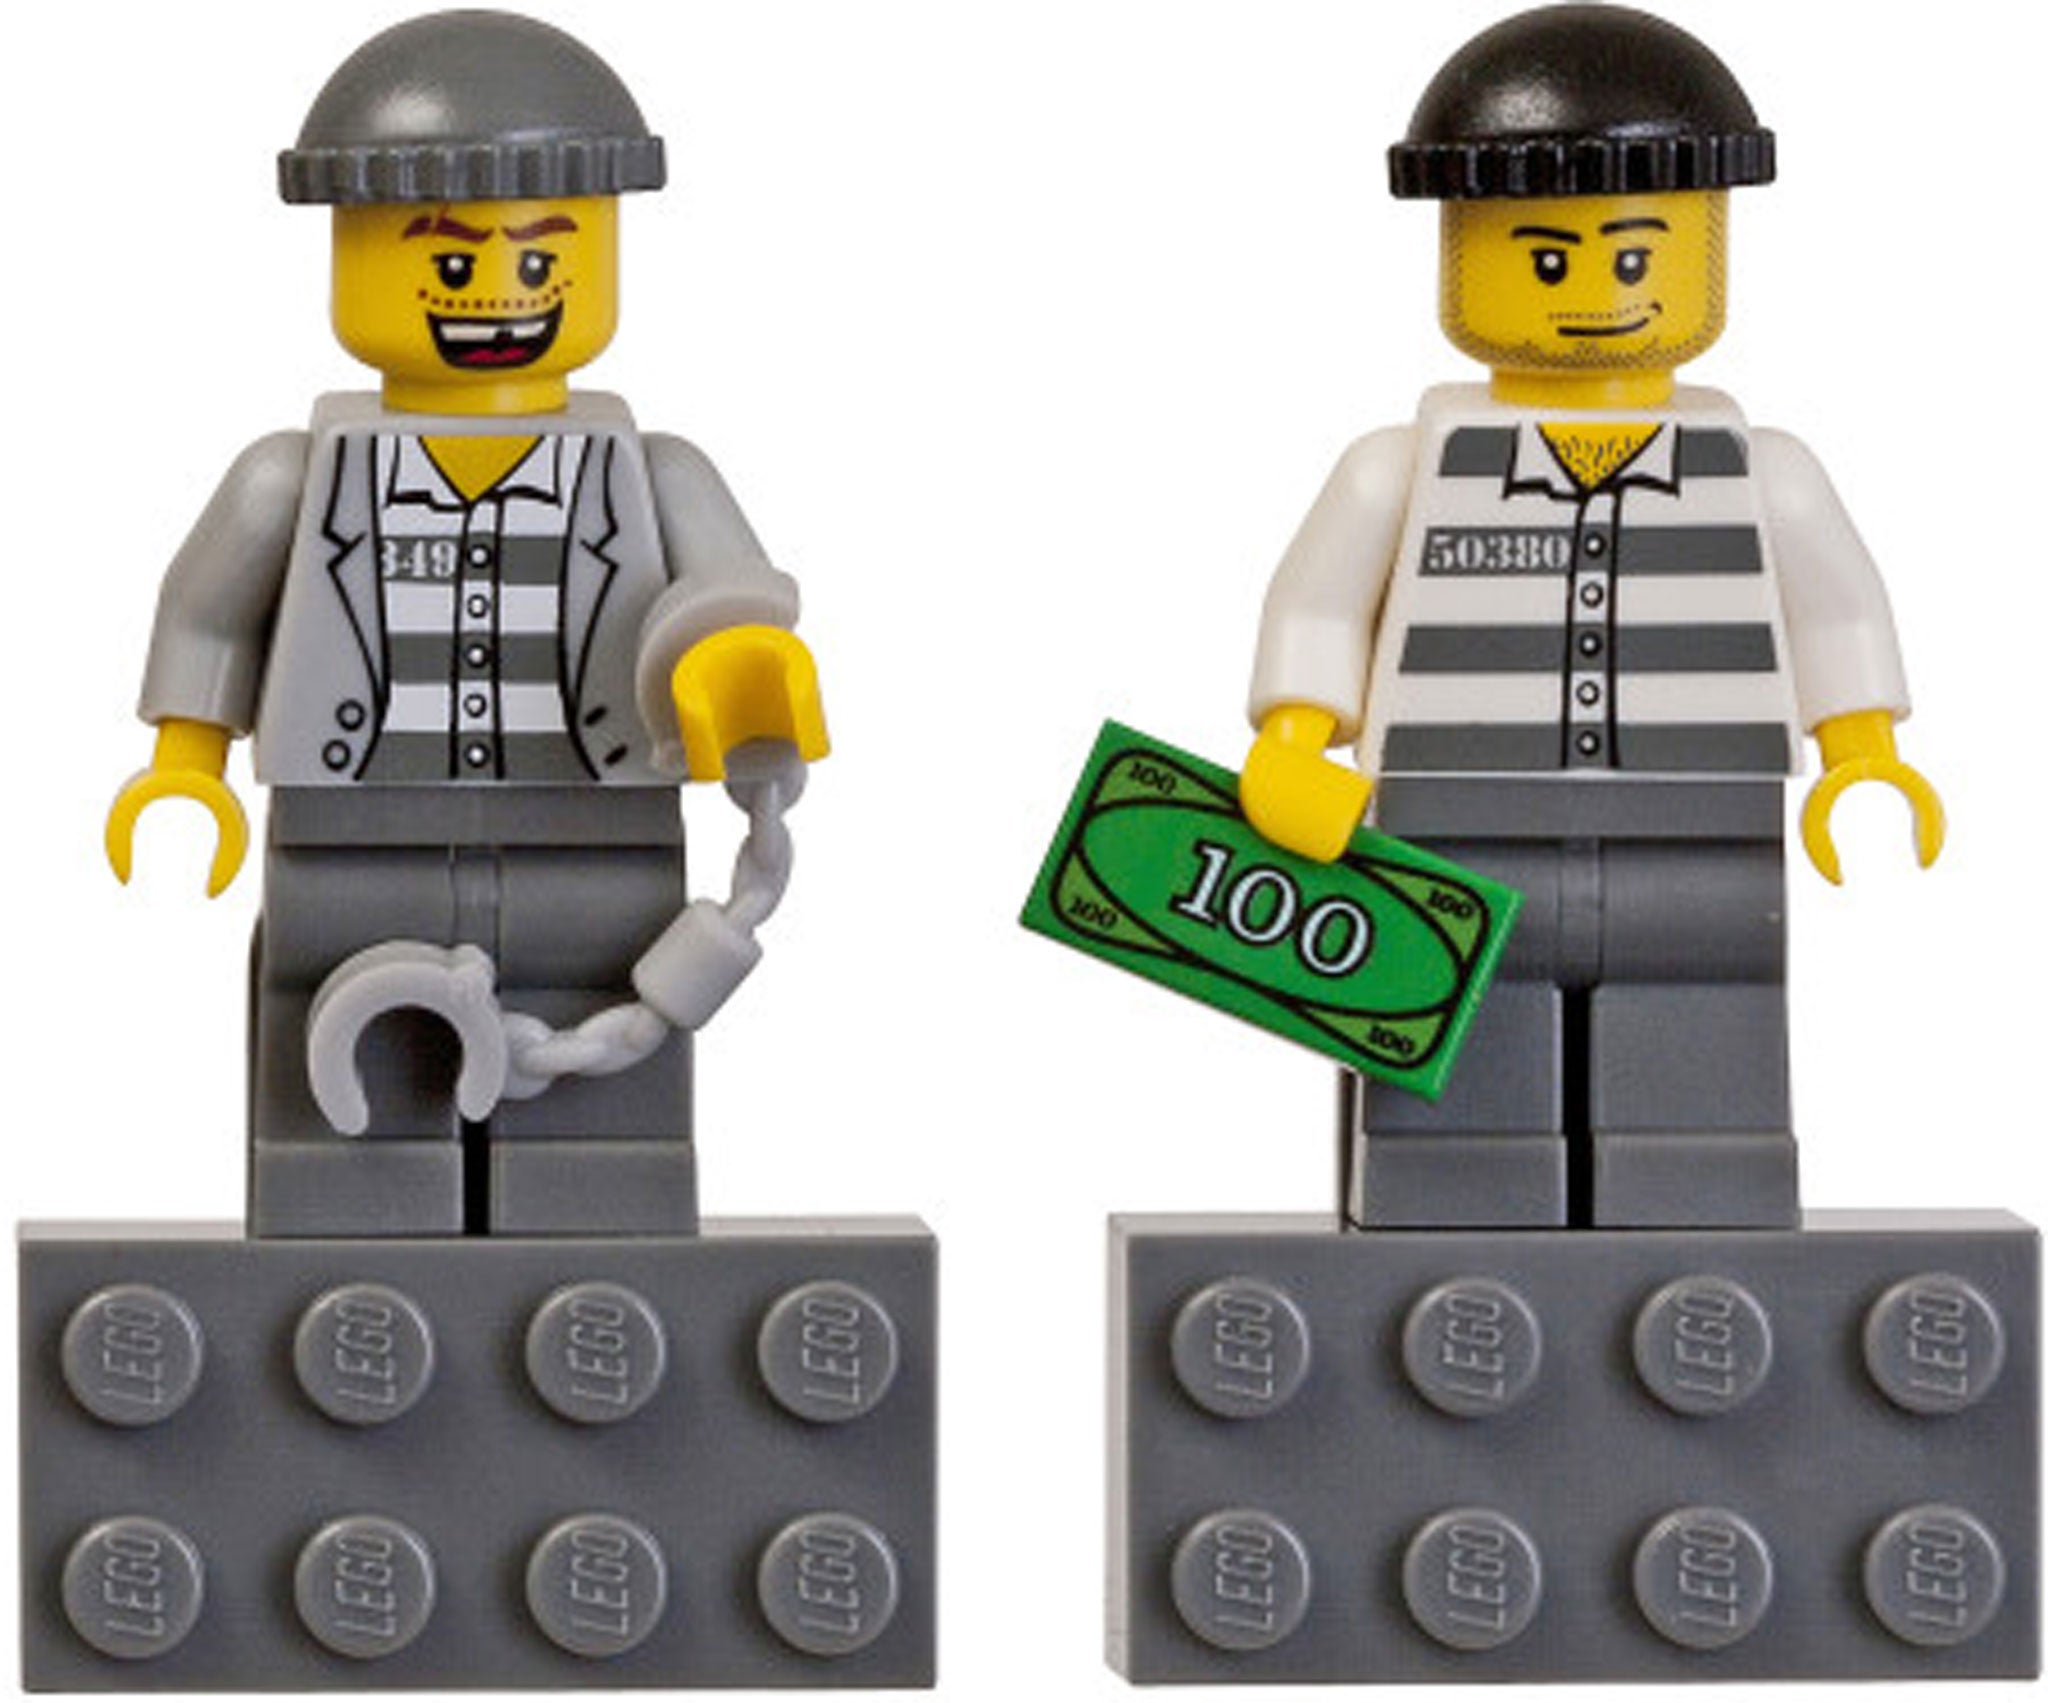 Lego thieves have raided shops across Australia, making off with £40k worth of the colourful bricks